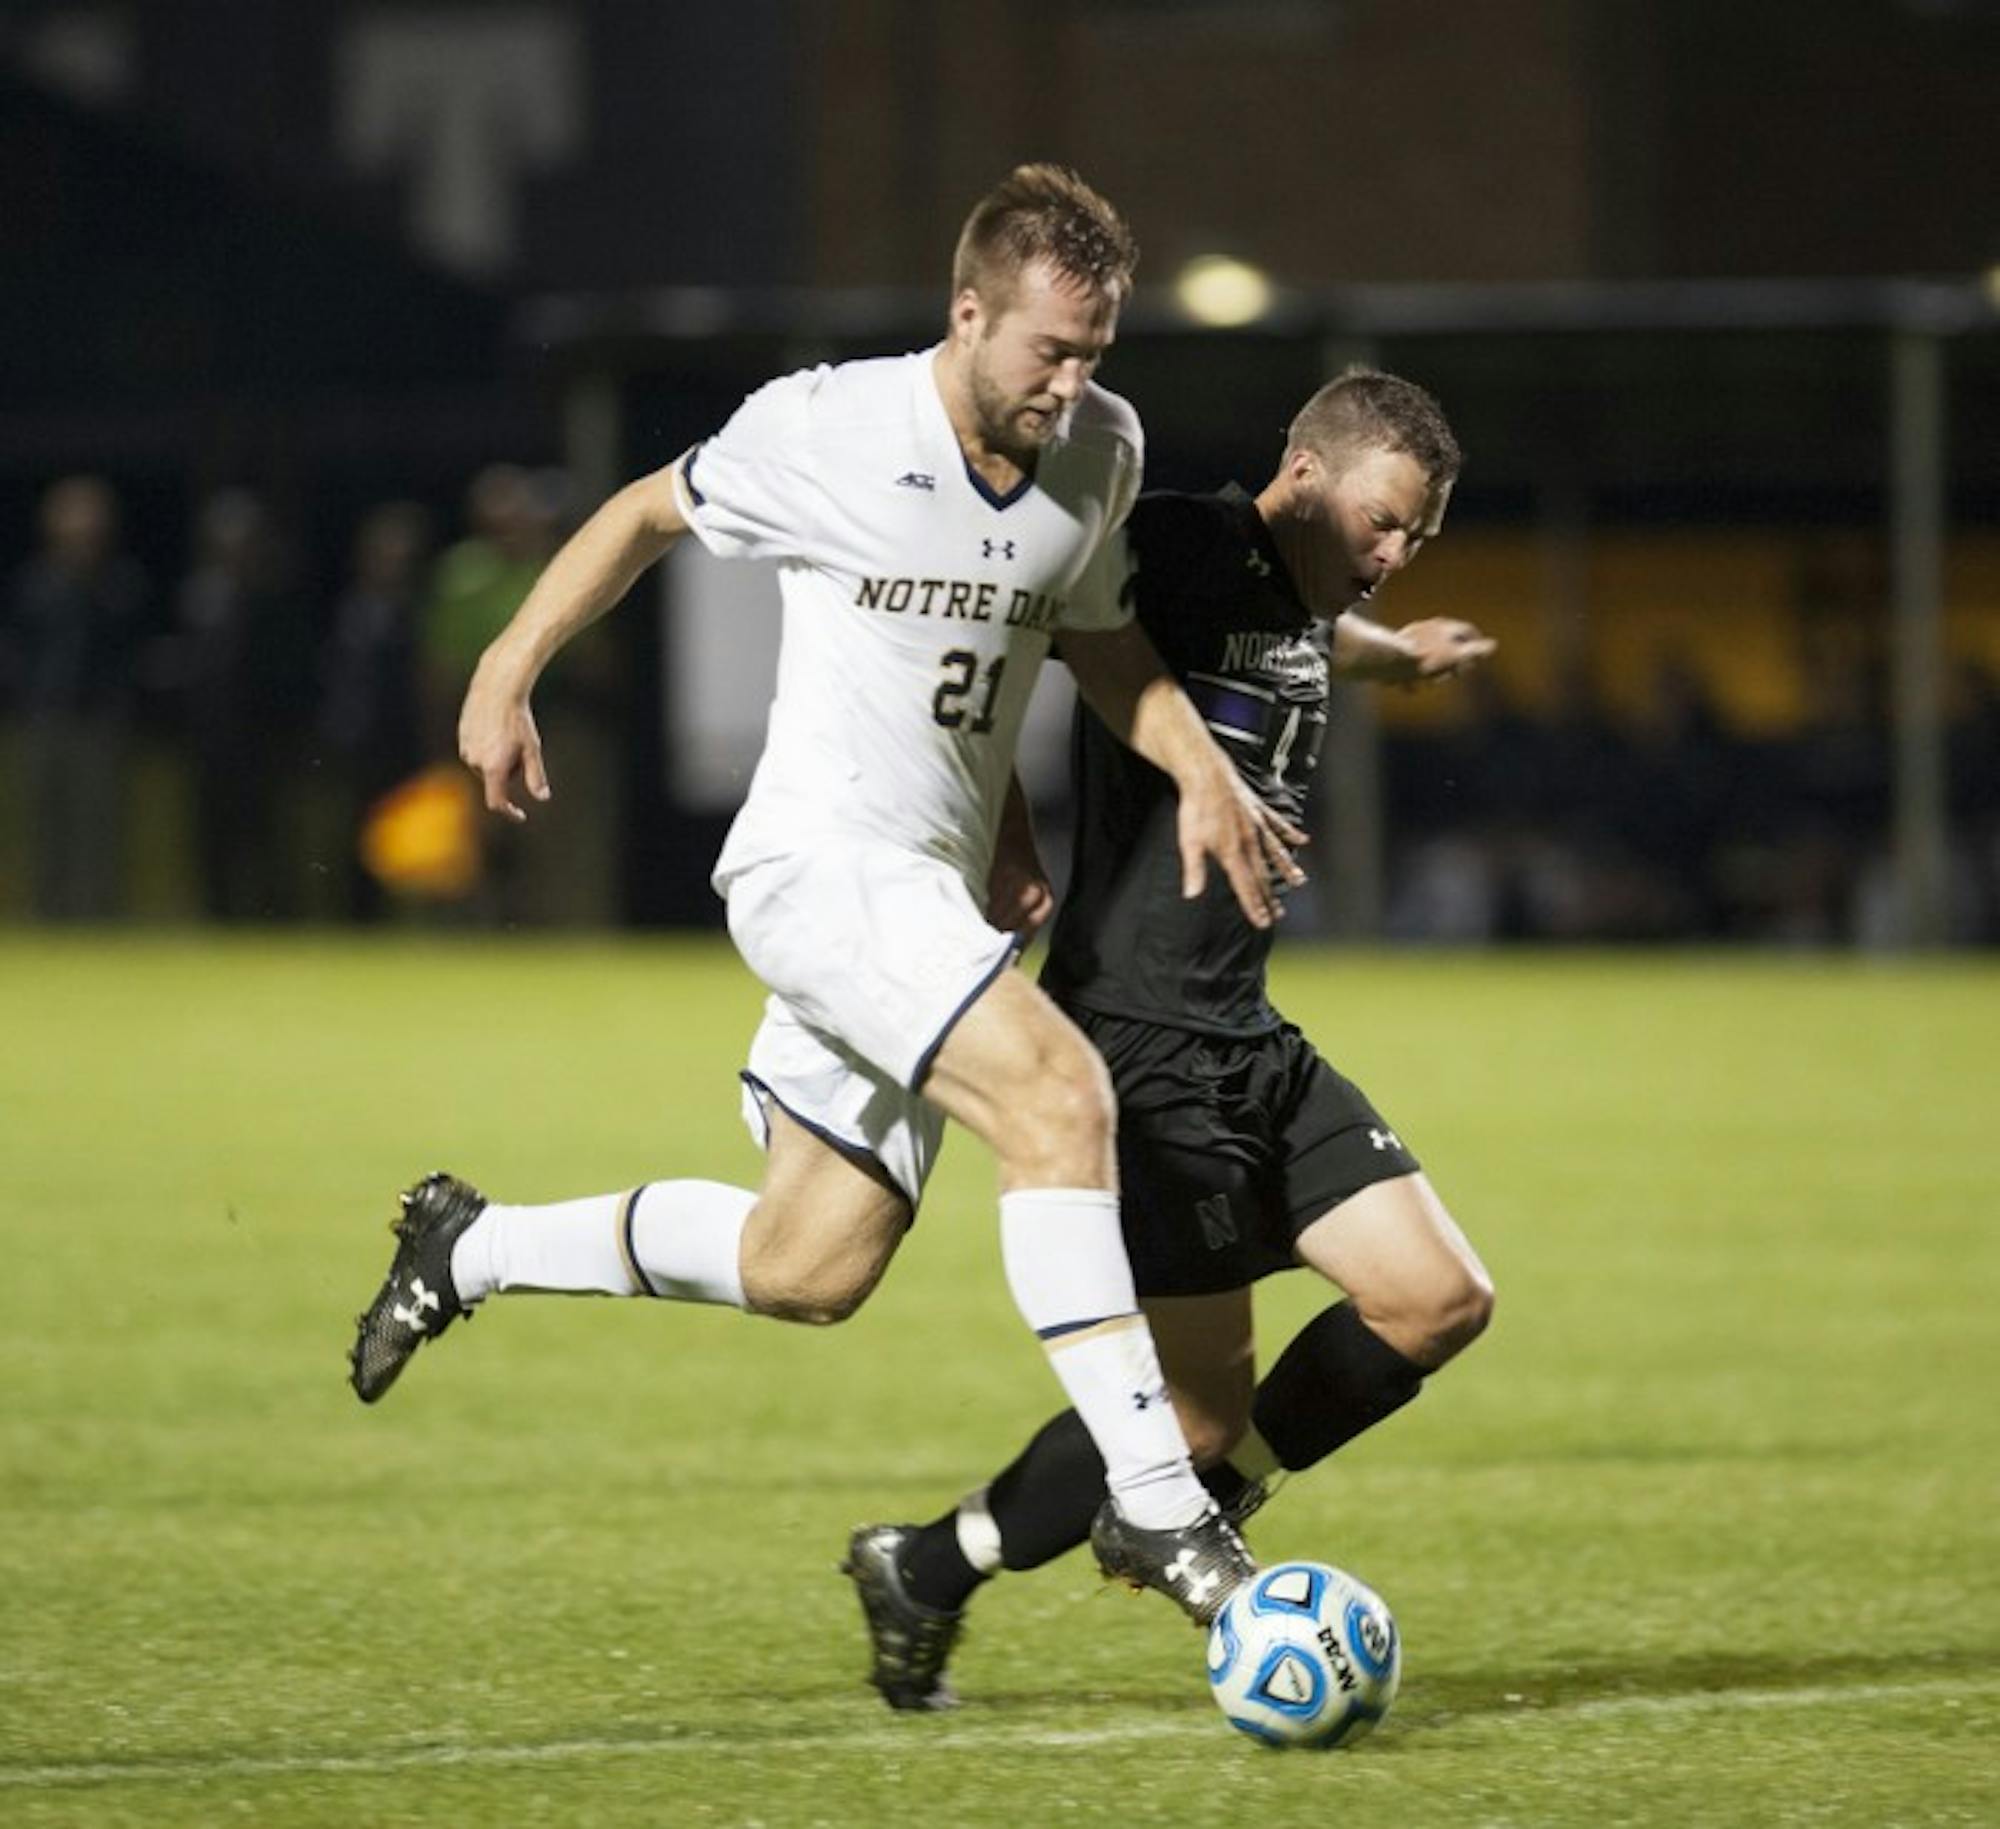 Irish senior forward Vince Cicciarelli battles for possession of the ball with a defender during Notre Dame’s 1-0 victory over Northwestern on Oct. 14, at Alumni Stadium.